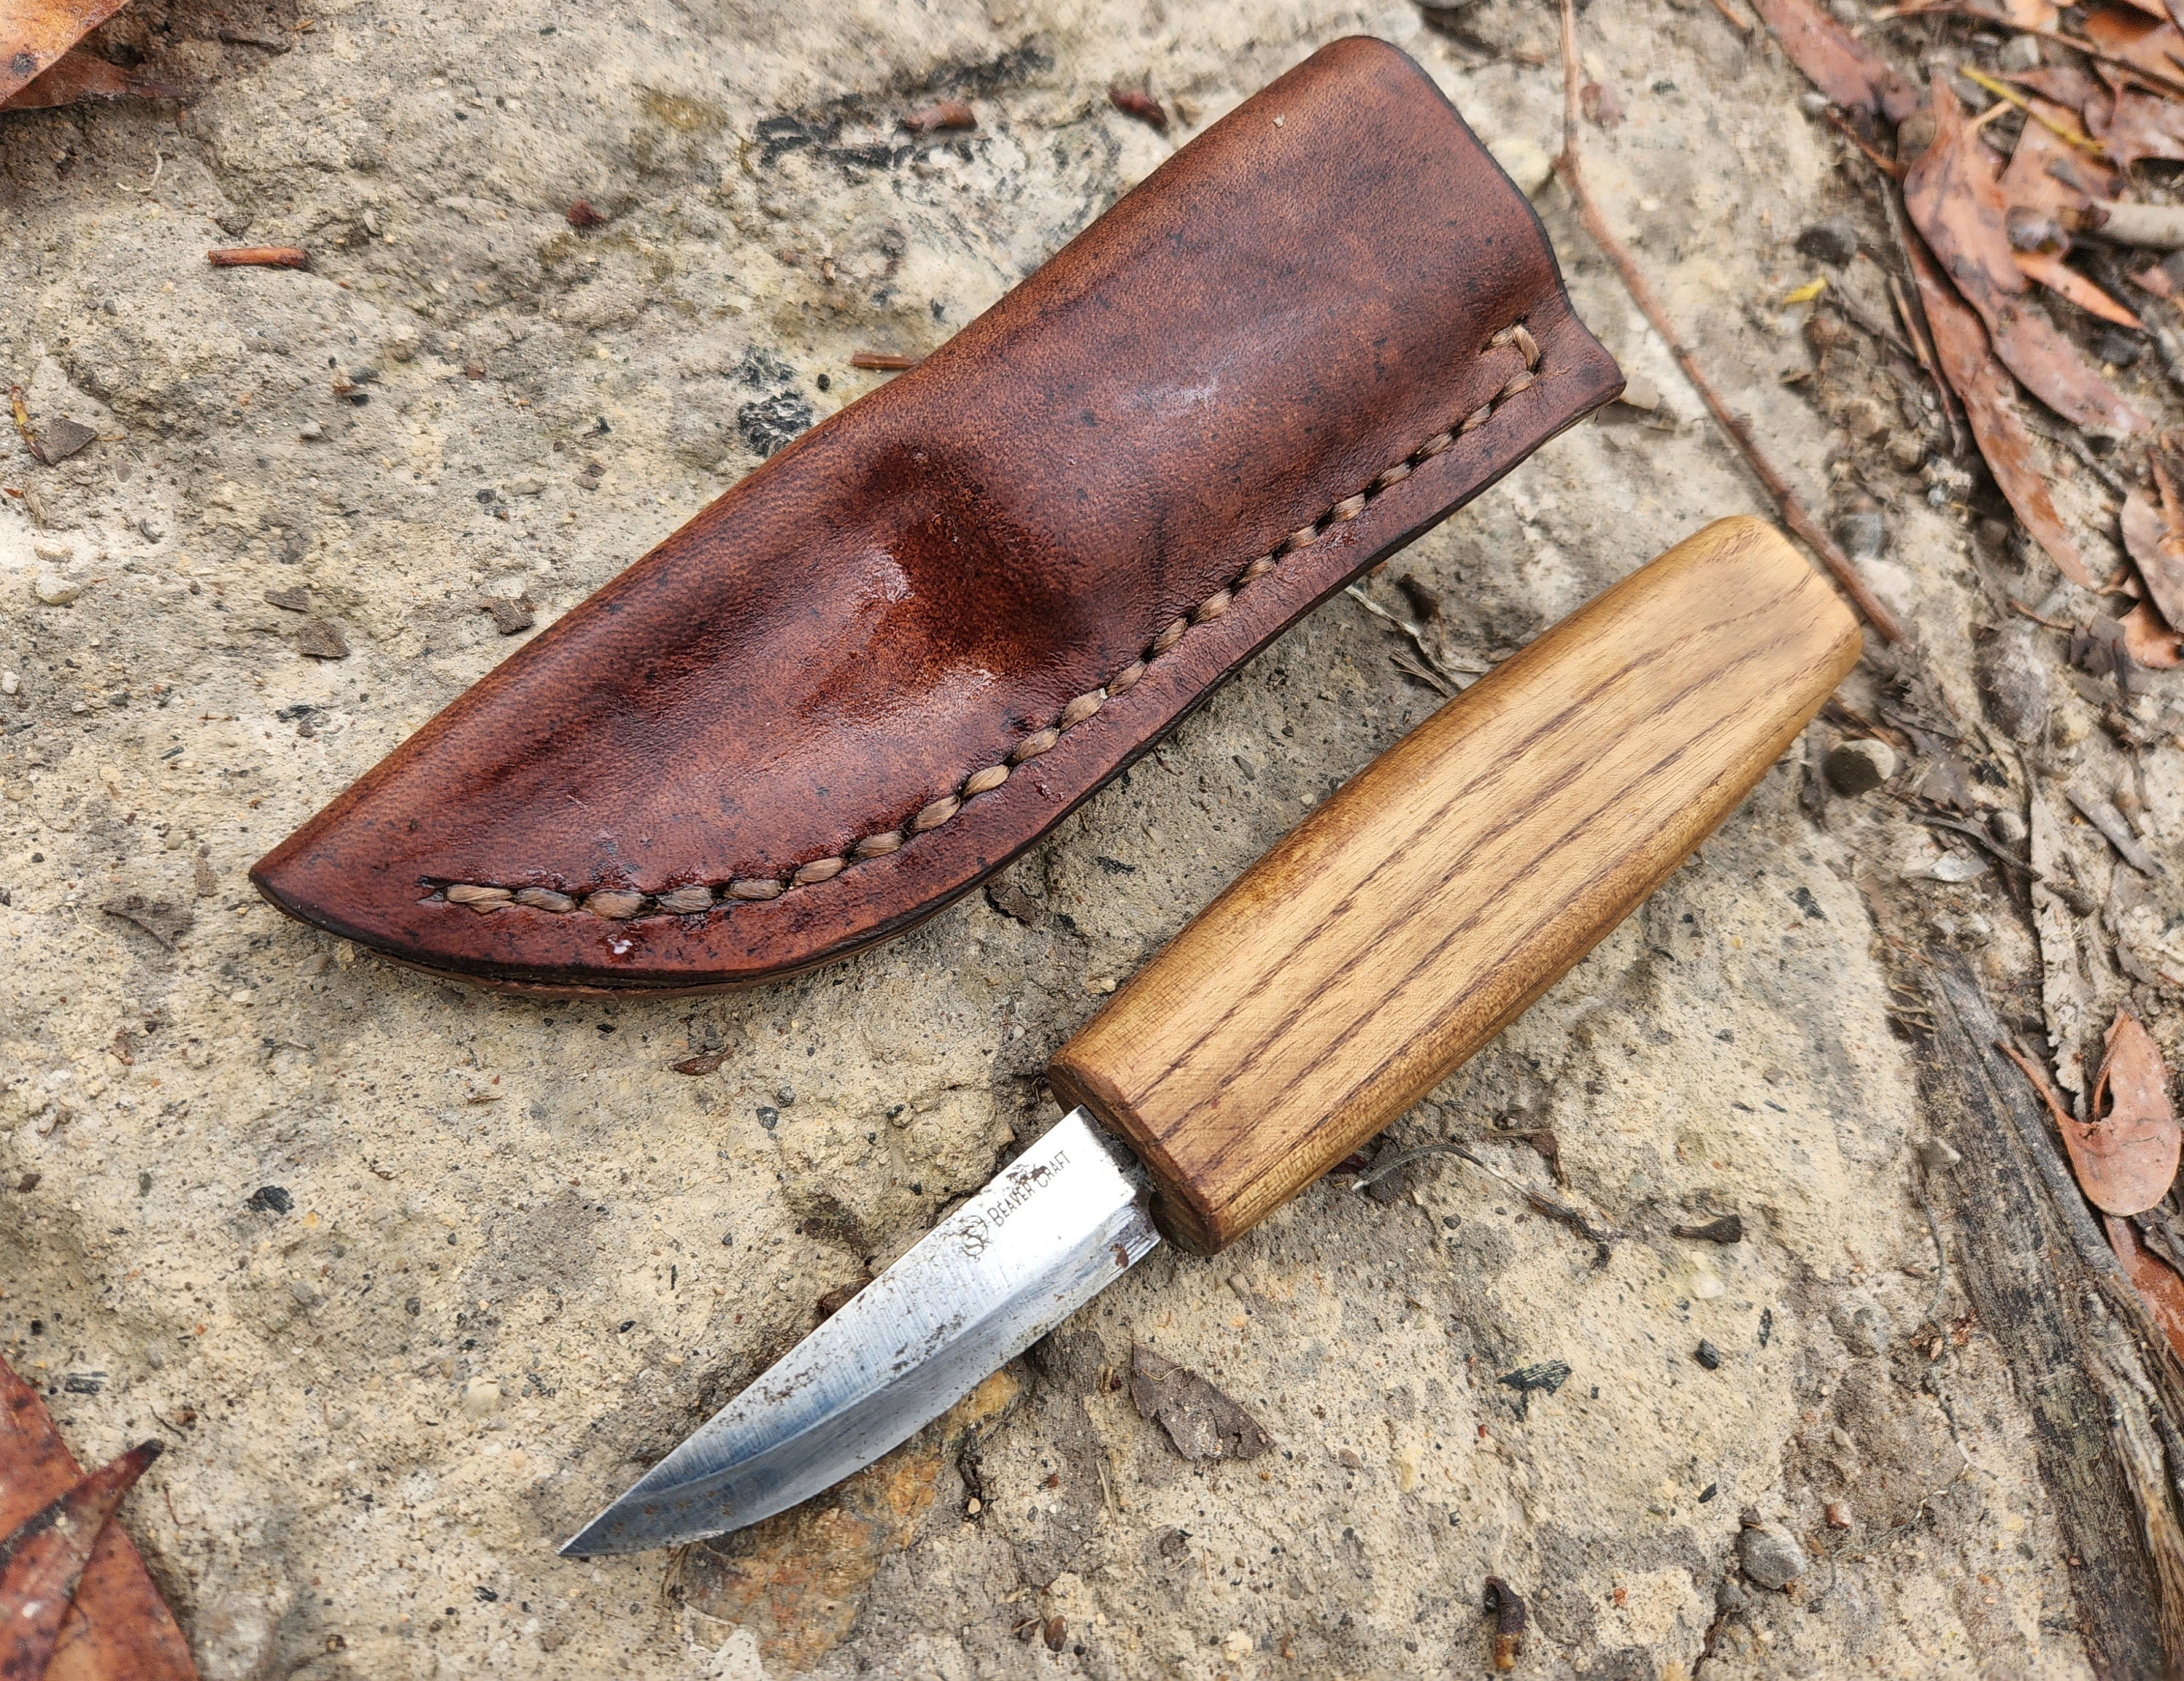 Whittling Knife Wood Carving Tool Handcrafted Hand Tools Whittling  Woodcarving Knife Knives Beveled Knife High Carbon Steel Beavercraft C13 